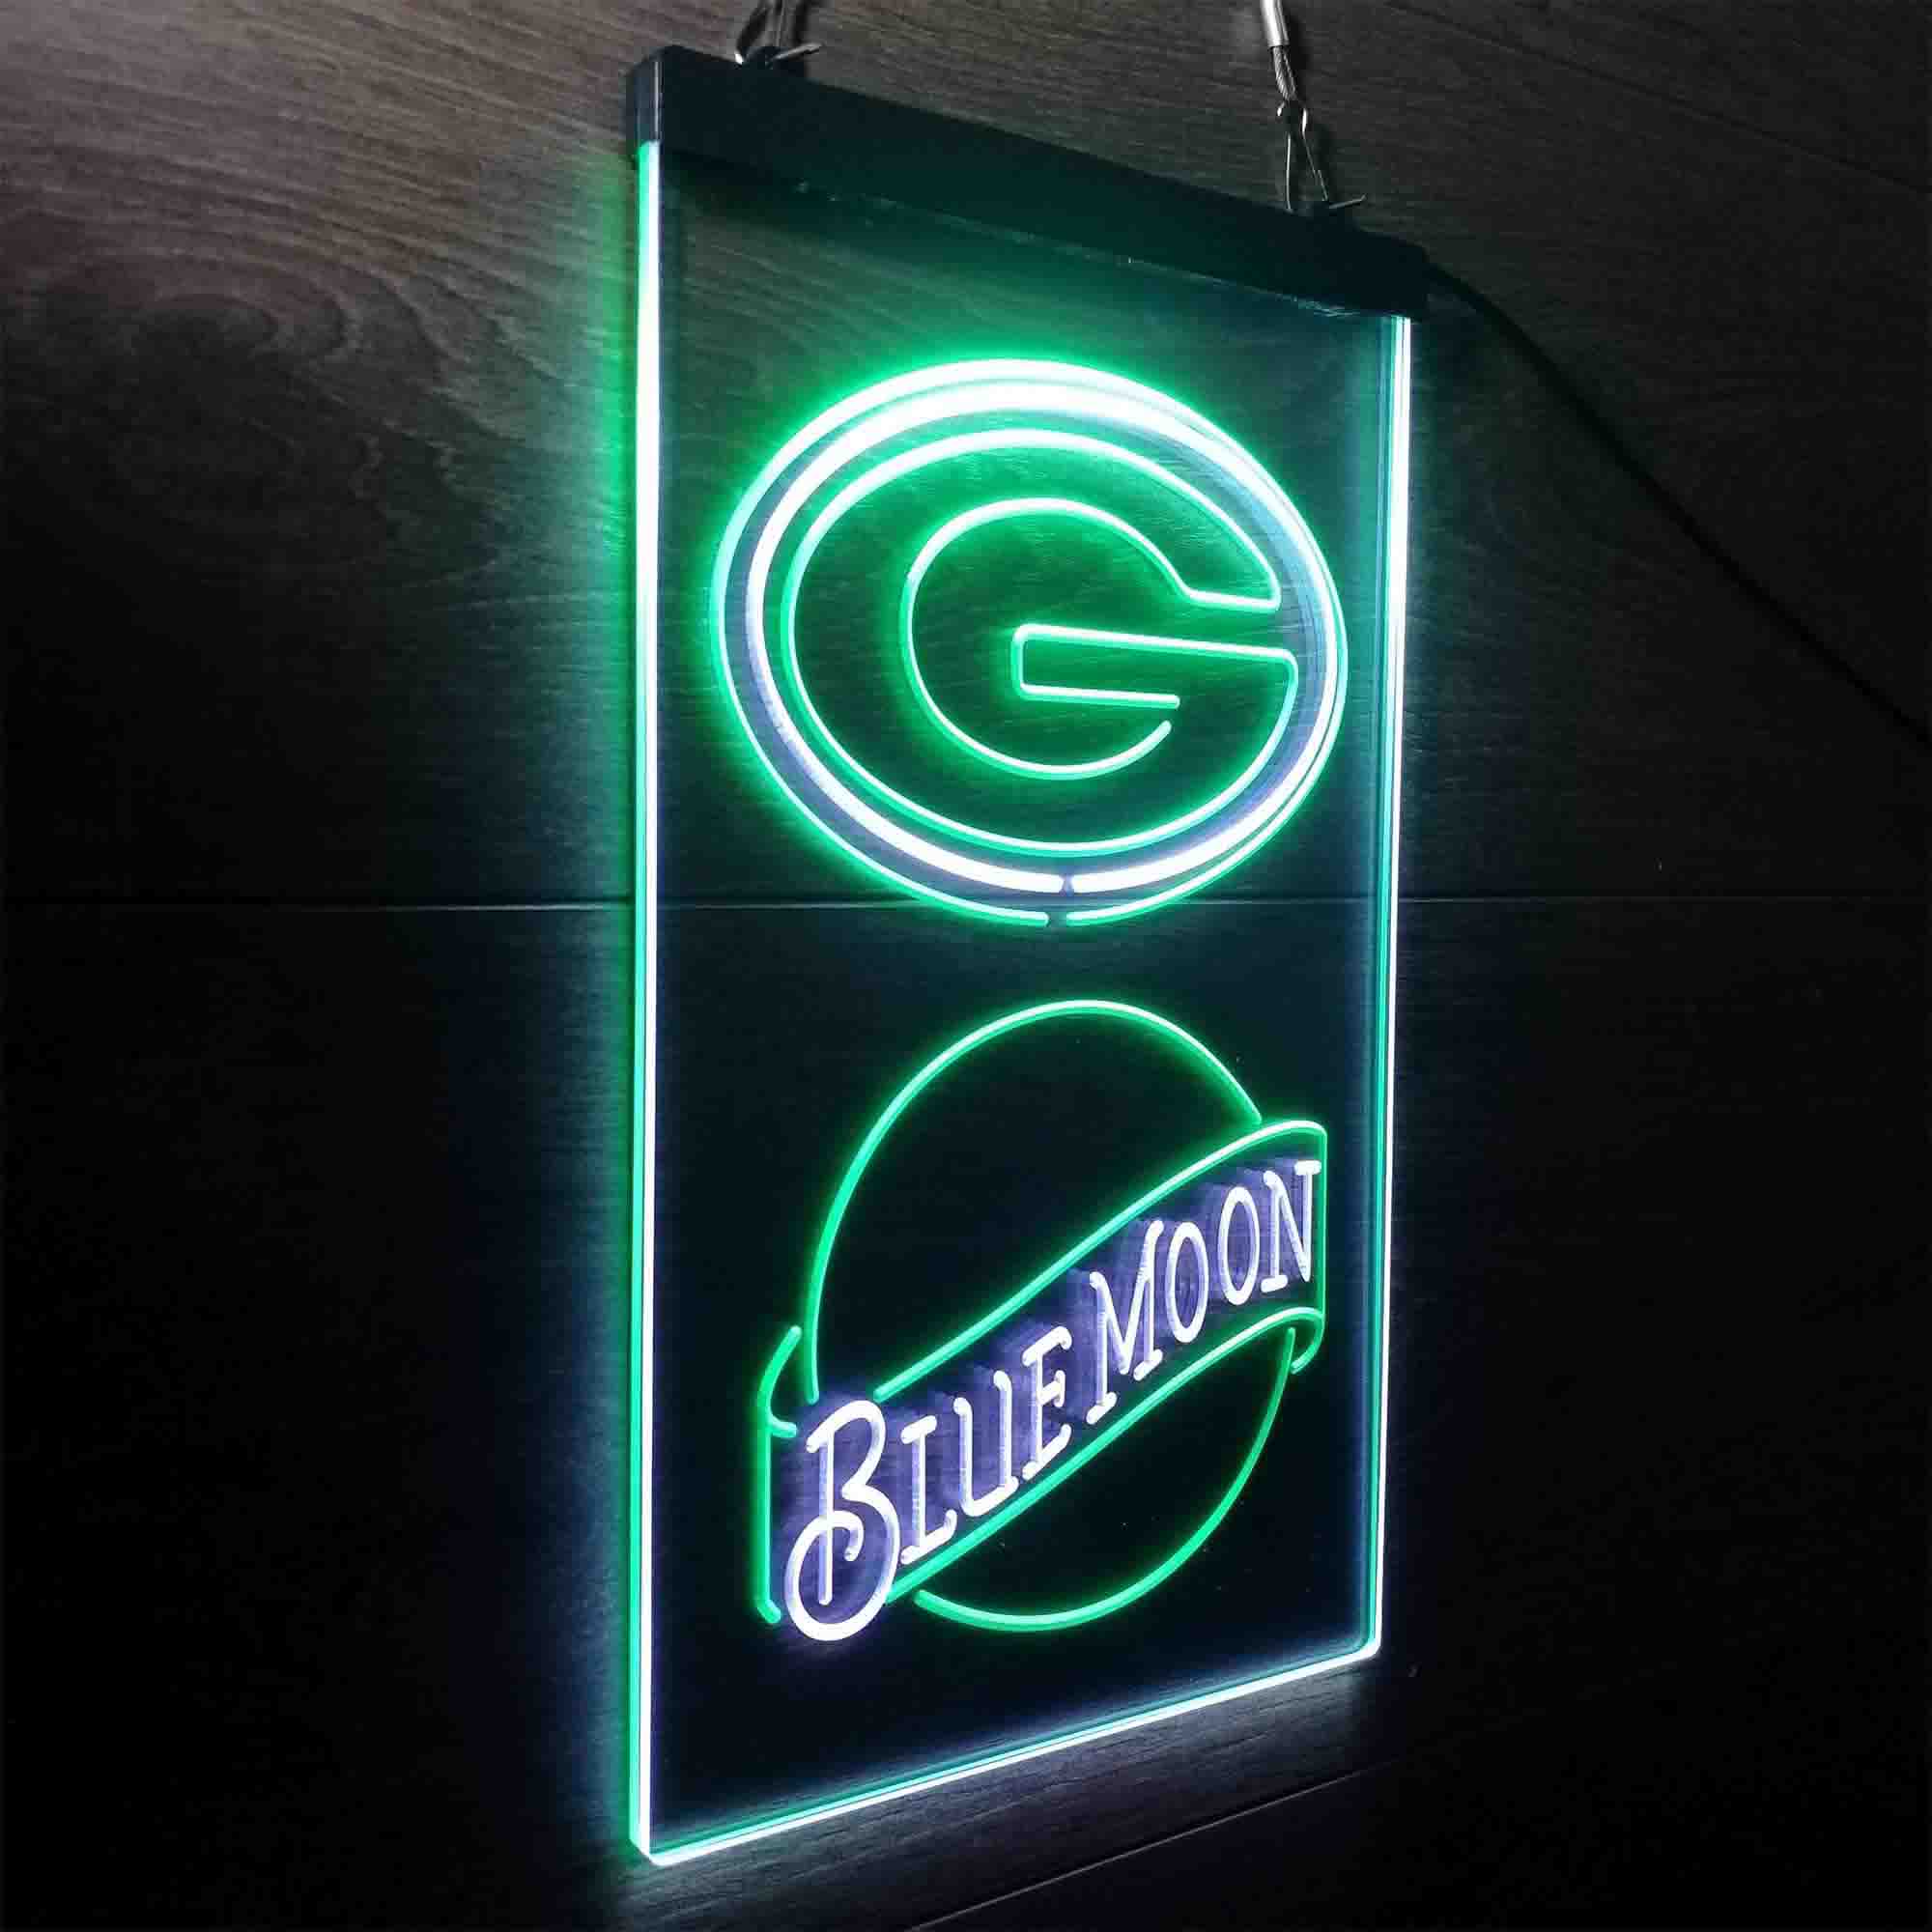 Blue Moon Bar Green Bay Packers Est. 1919 LED Neon Sign